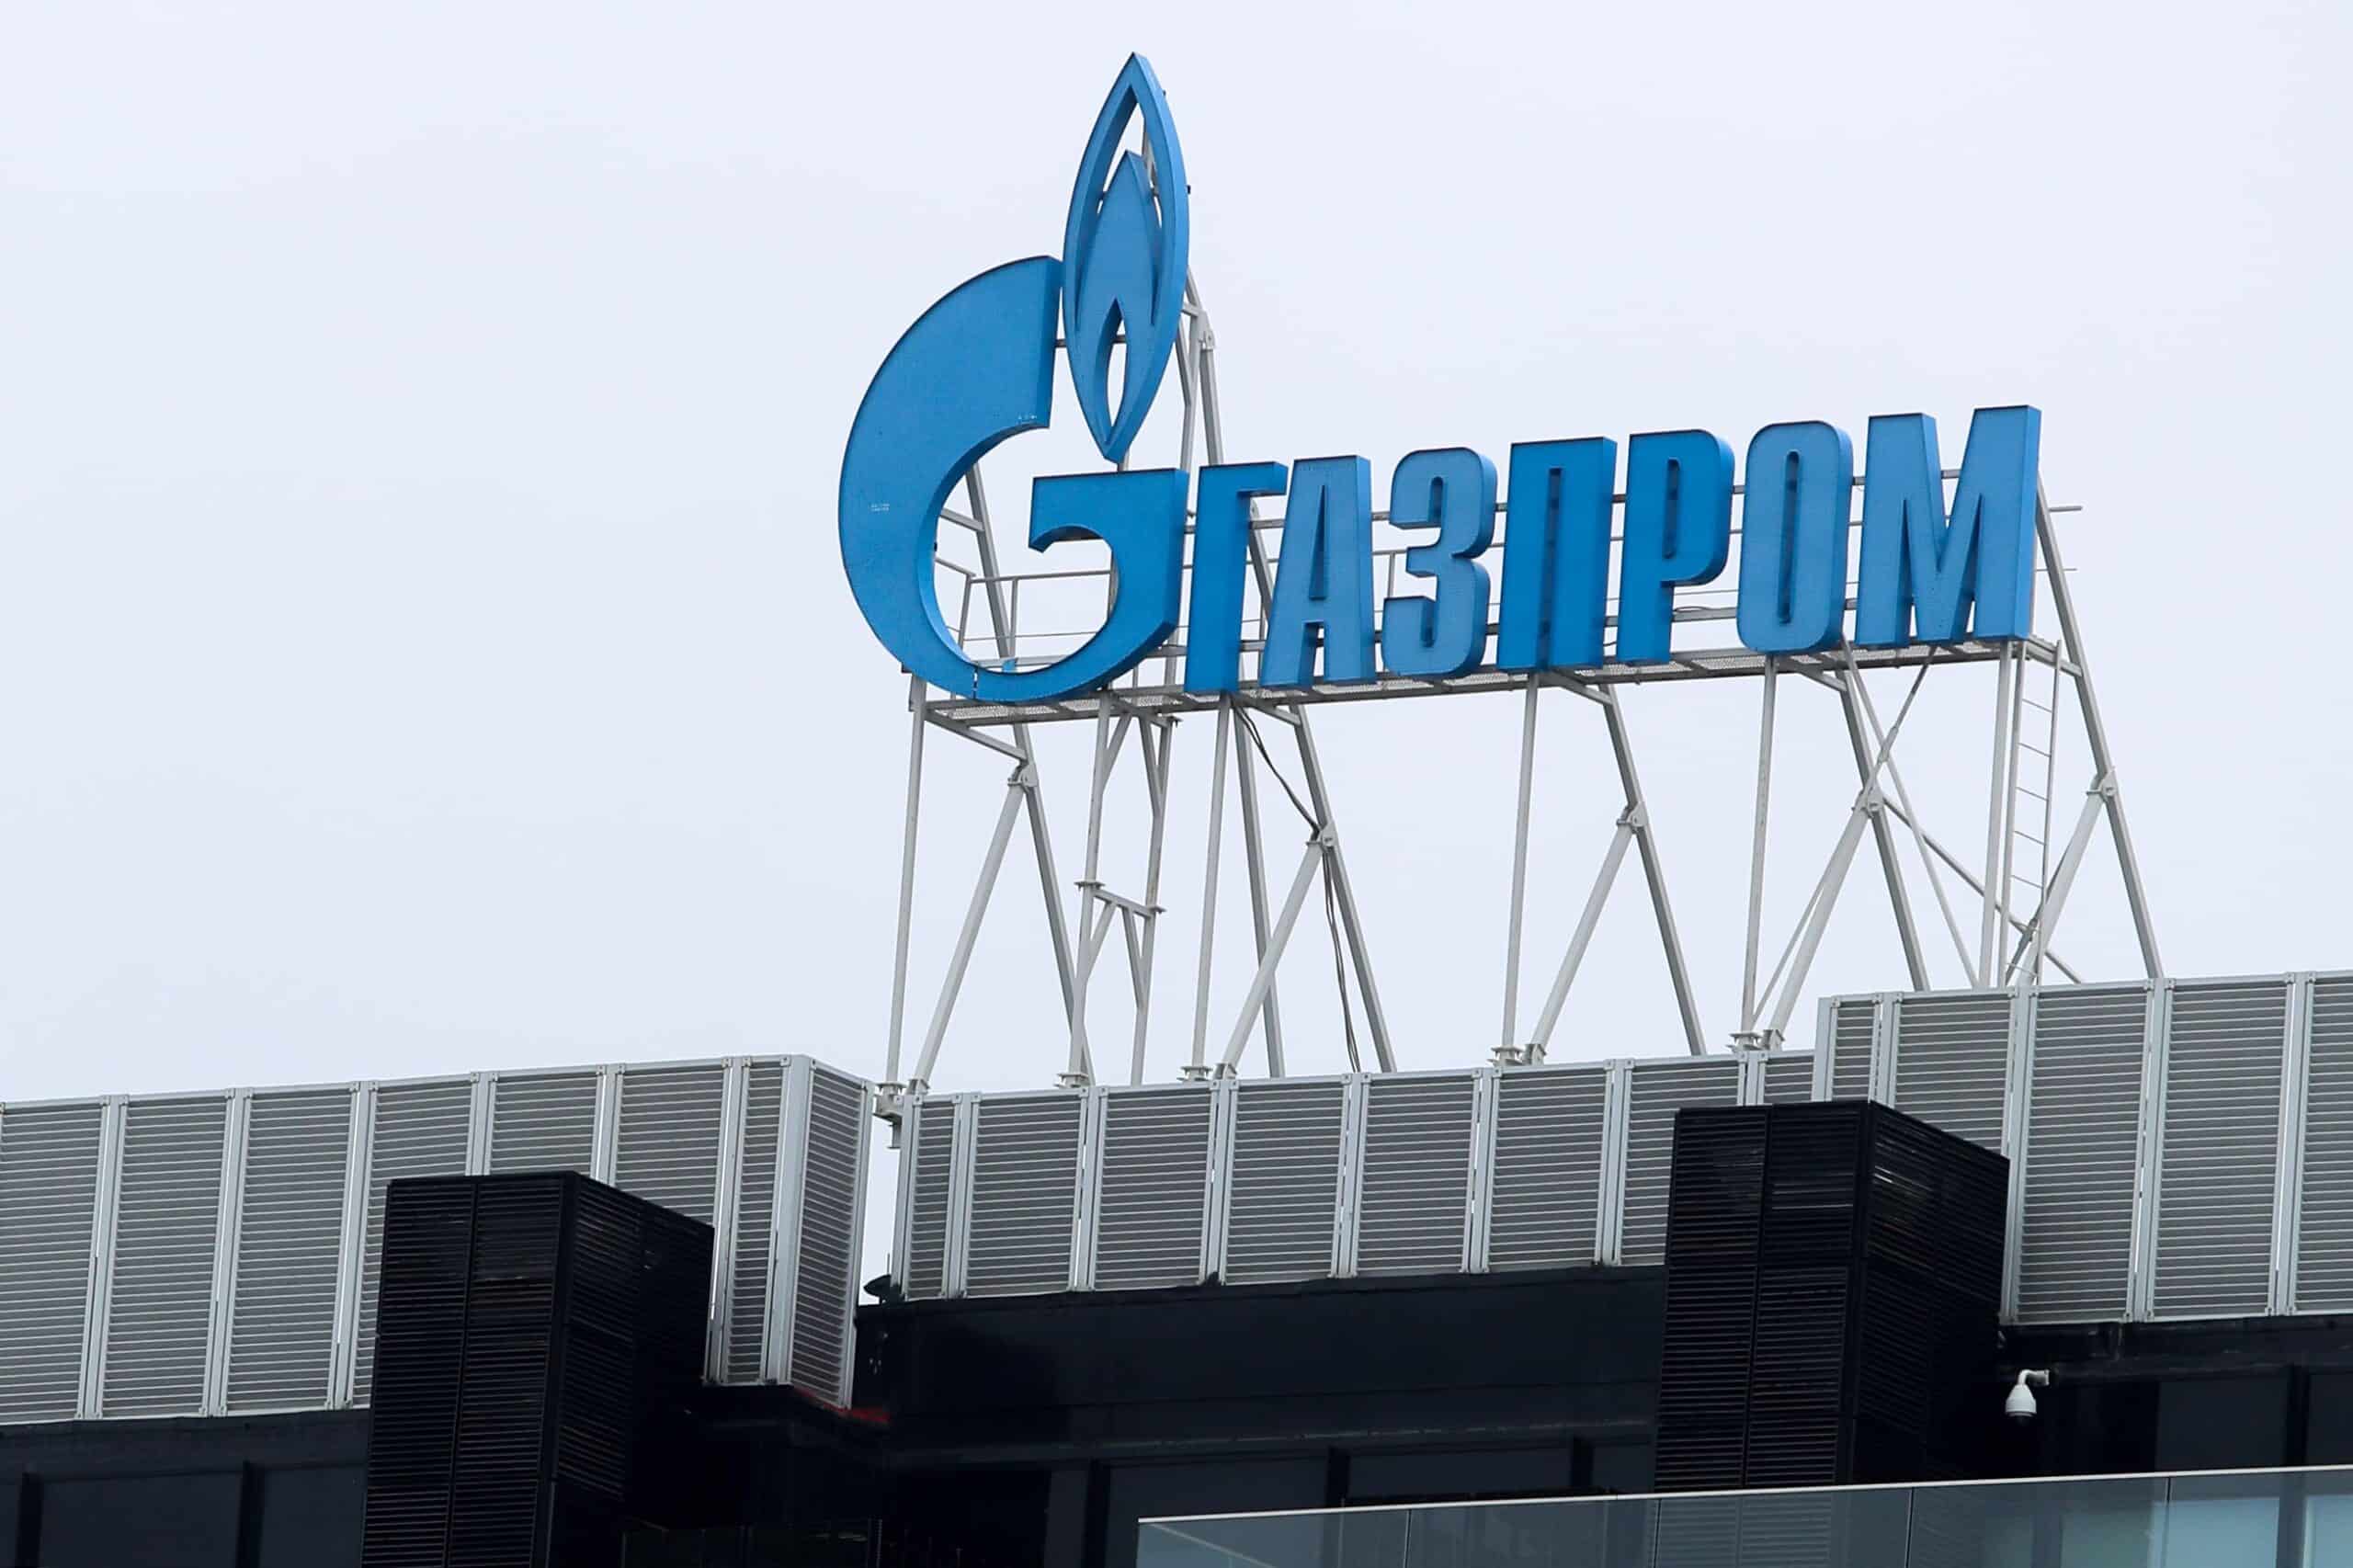 Gazprom, Russia's state-owned energy company, strengthens its grip on the continent's gas supply.